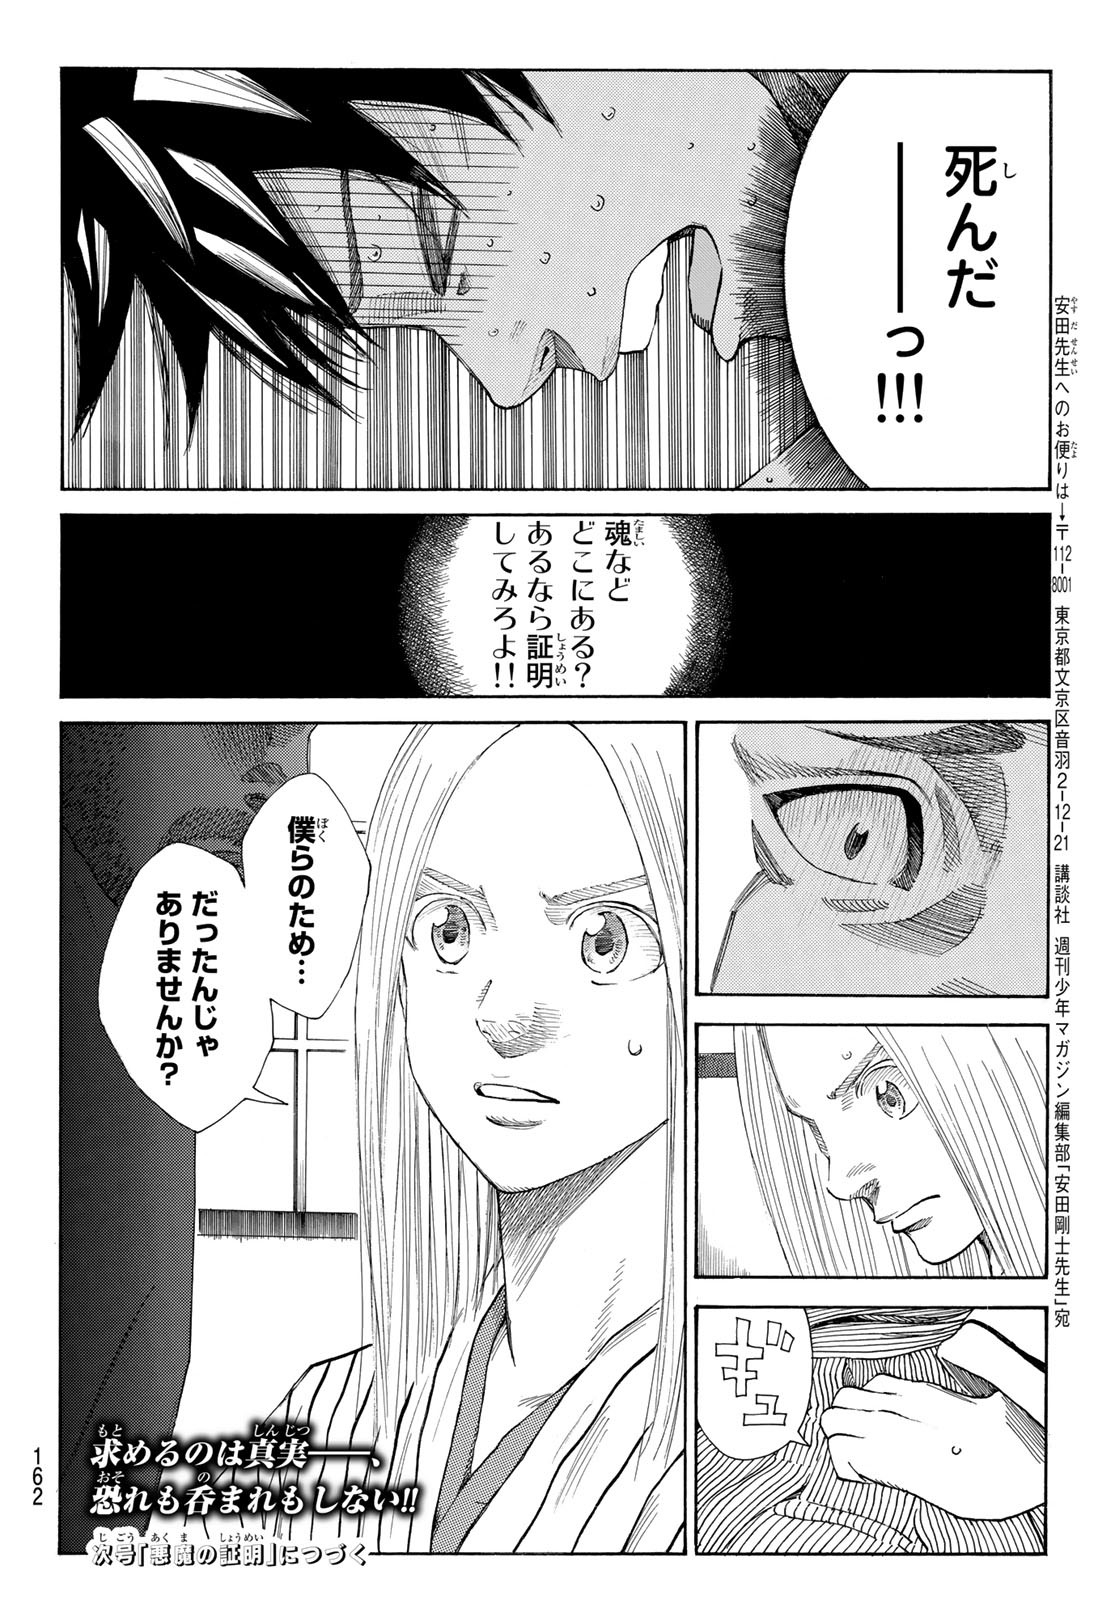 An Mo Miburo 第6話 - Page 20